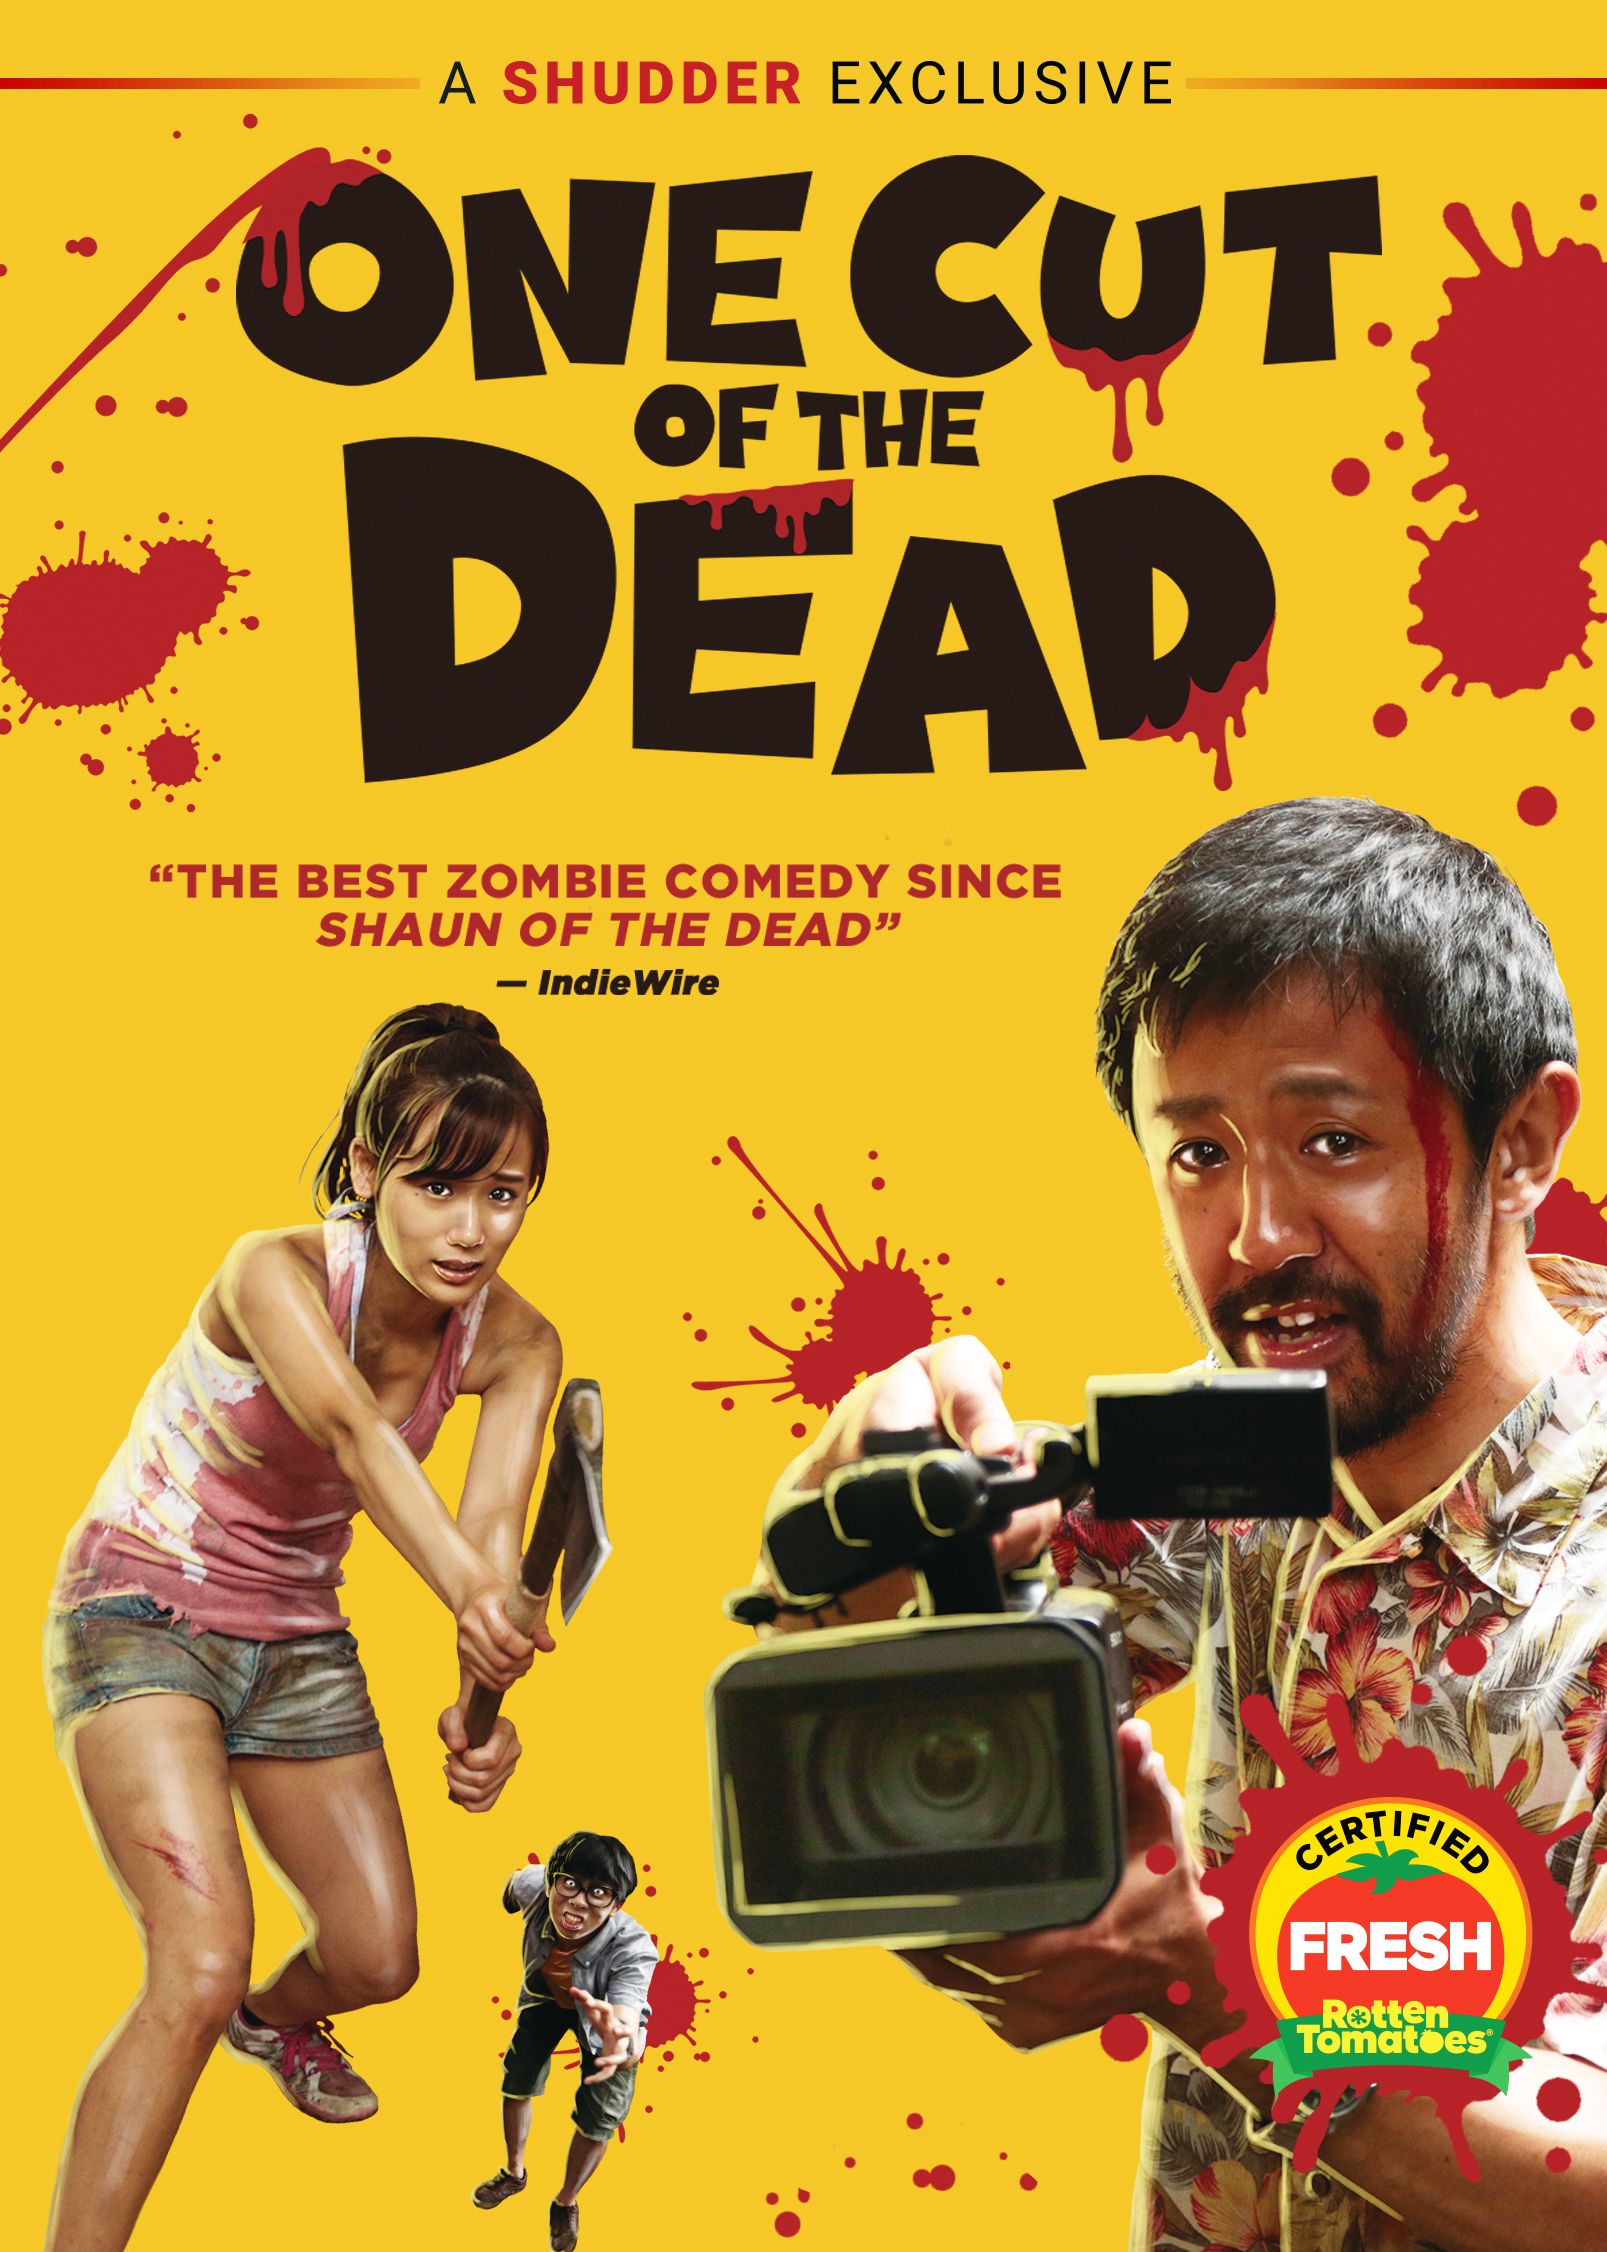 One Cut of the Dead blu-ray